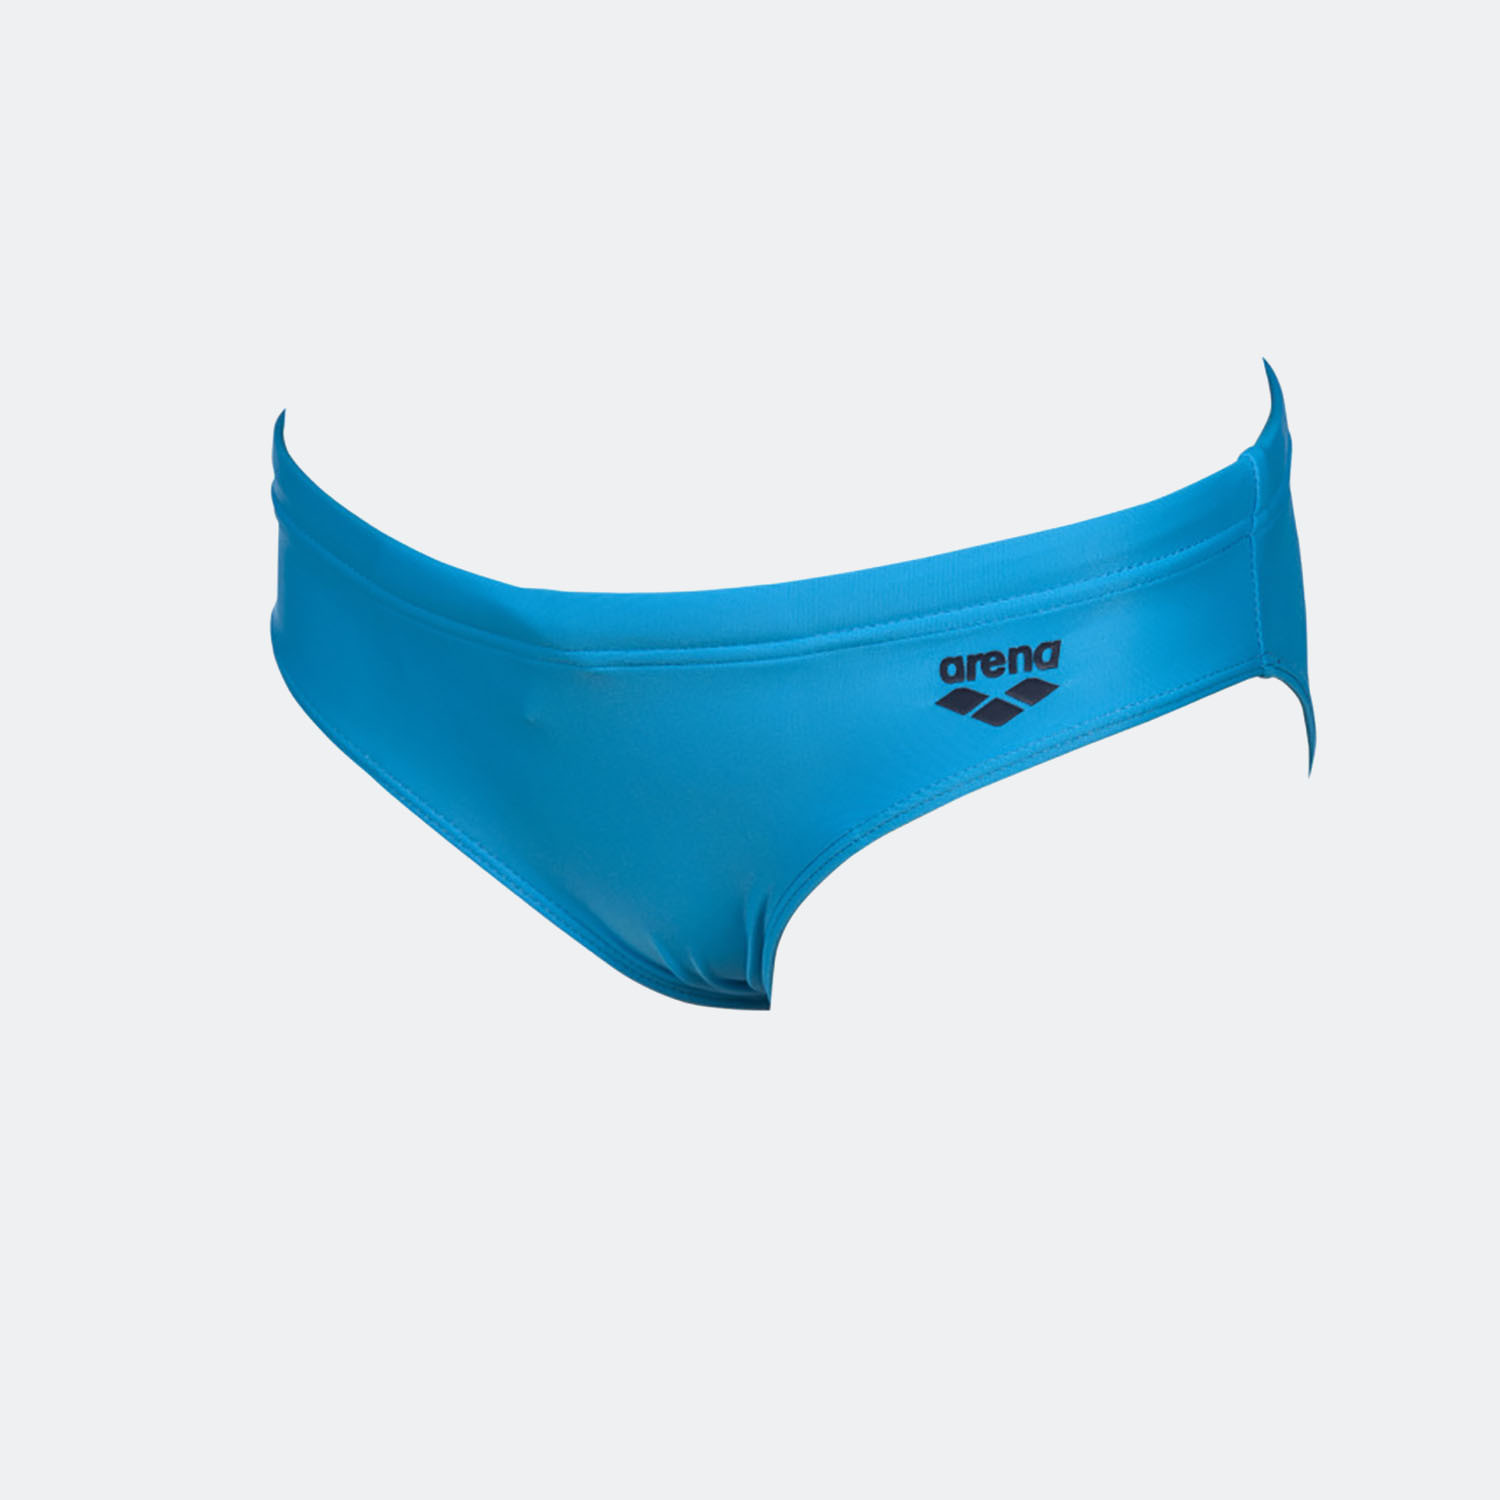 Arena Awt Brief Boys’ Swimsuit (9000050055_20703)